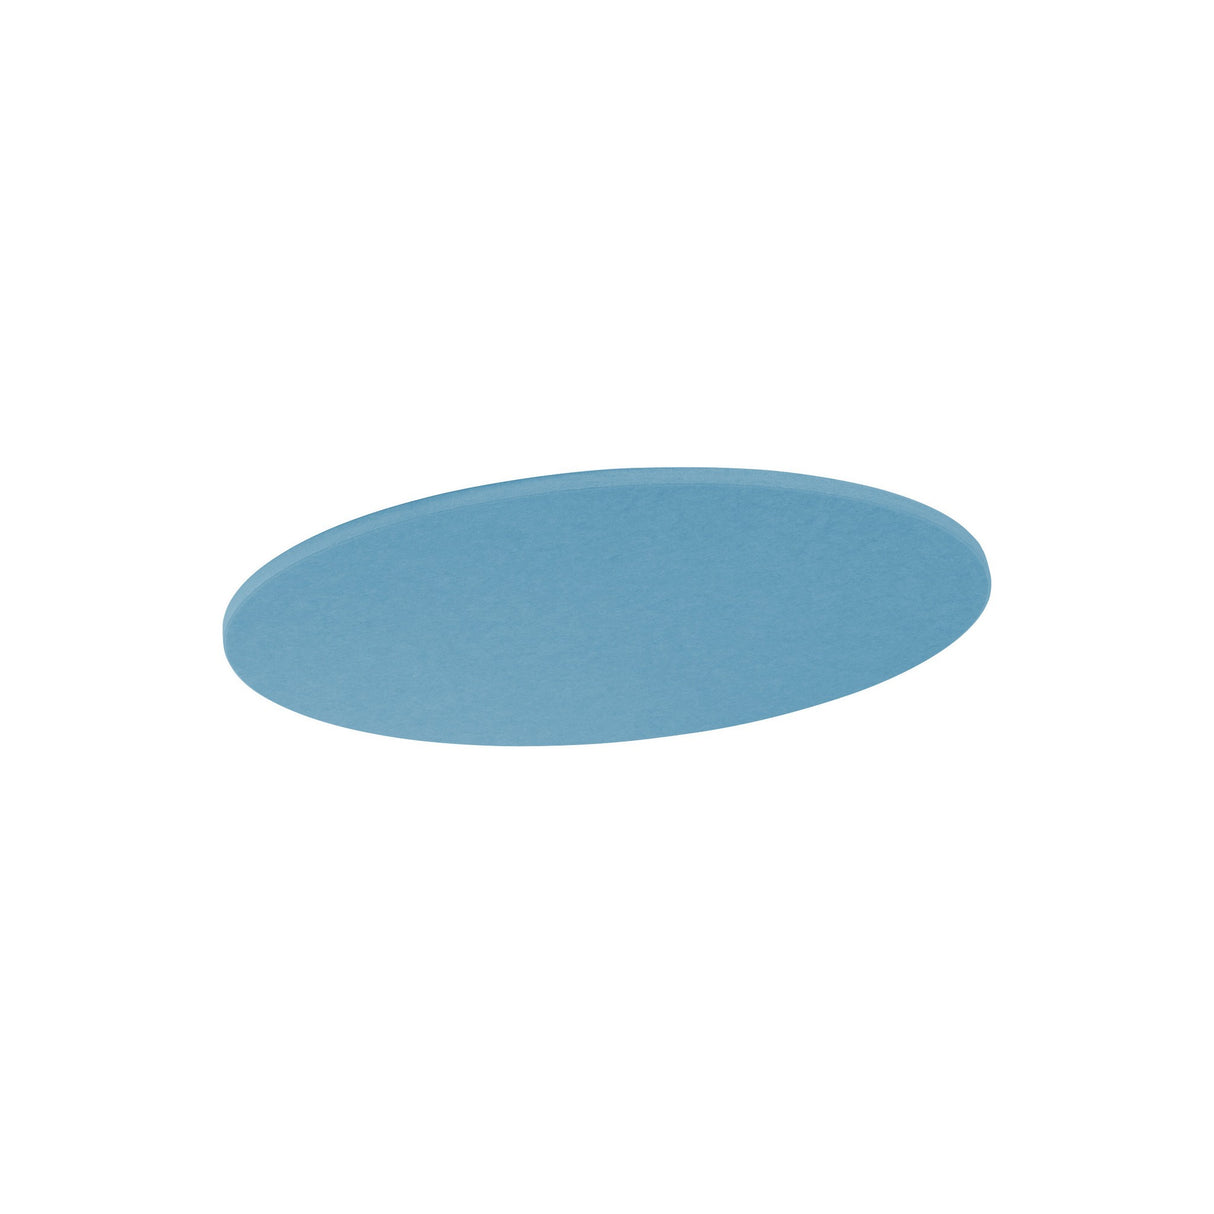 Primacoustic EcoScapes Round Cloud 33-Inch Micro-Beveled Edge Wall Panel, Pacific 2-Pack